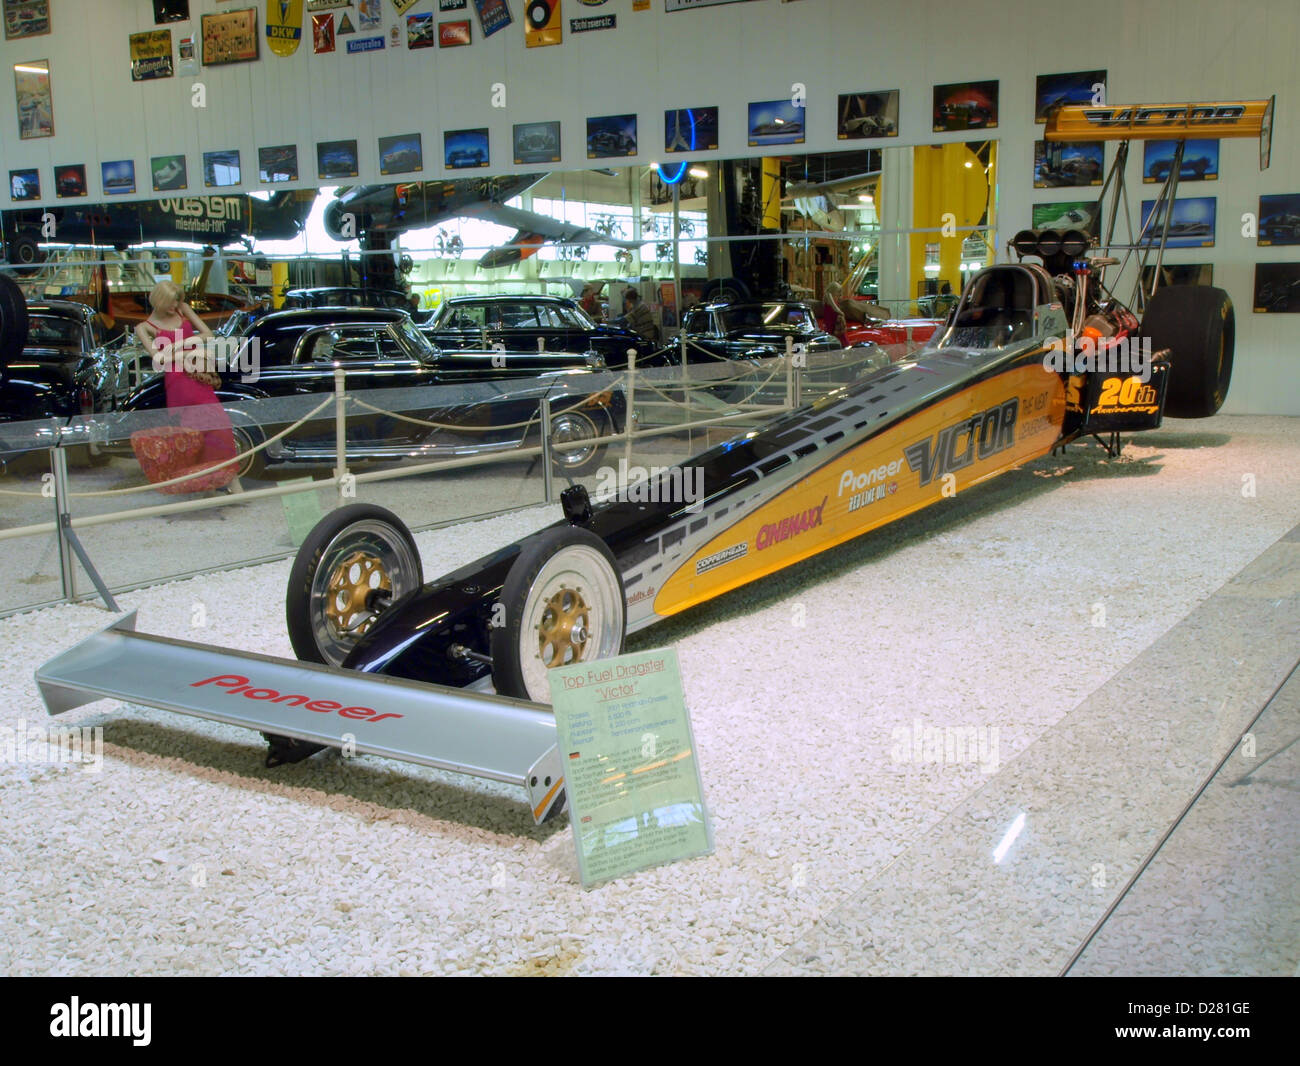 Auto & Technic museum Sinsheim.2001 Hadman Chassis, Top Fuel Dragster 'Victor' Stock Photo